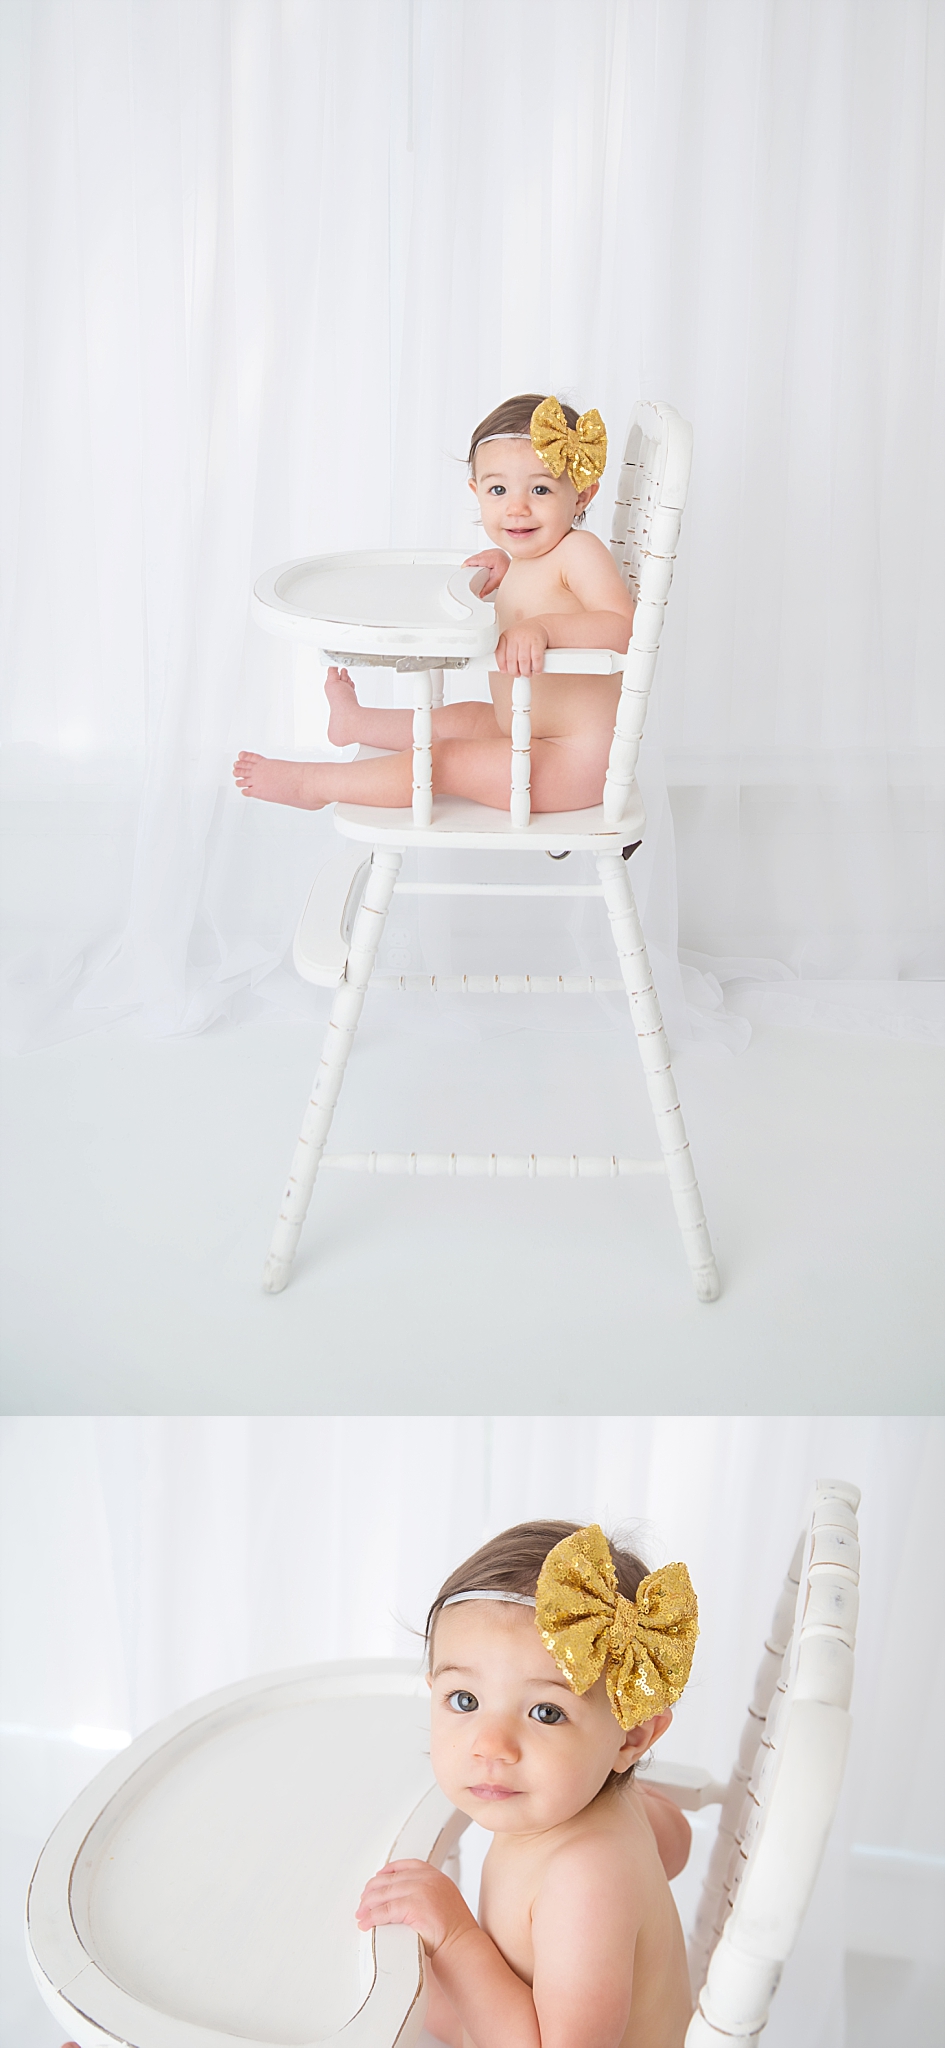 st-louis-first-birthday-cake-smash-photographer-baby-girl-in-white-high-chair-with-white-window-curtain.jpg